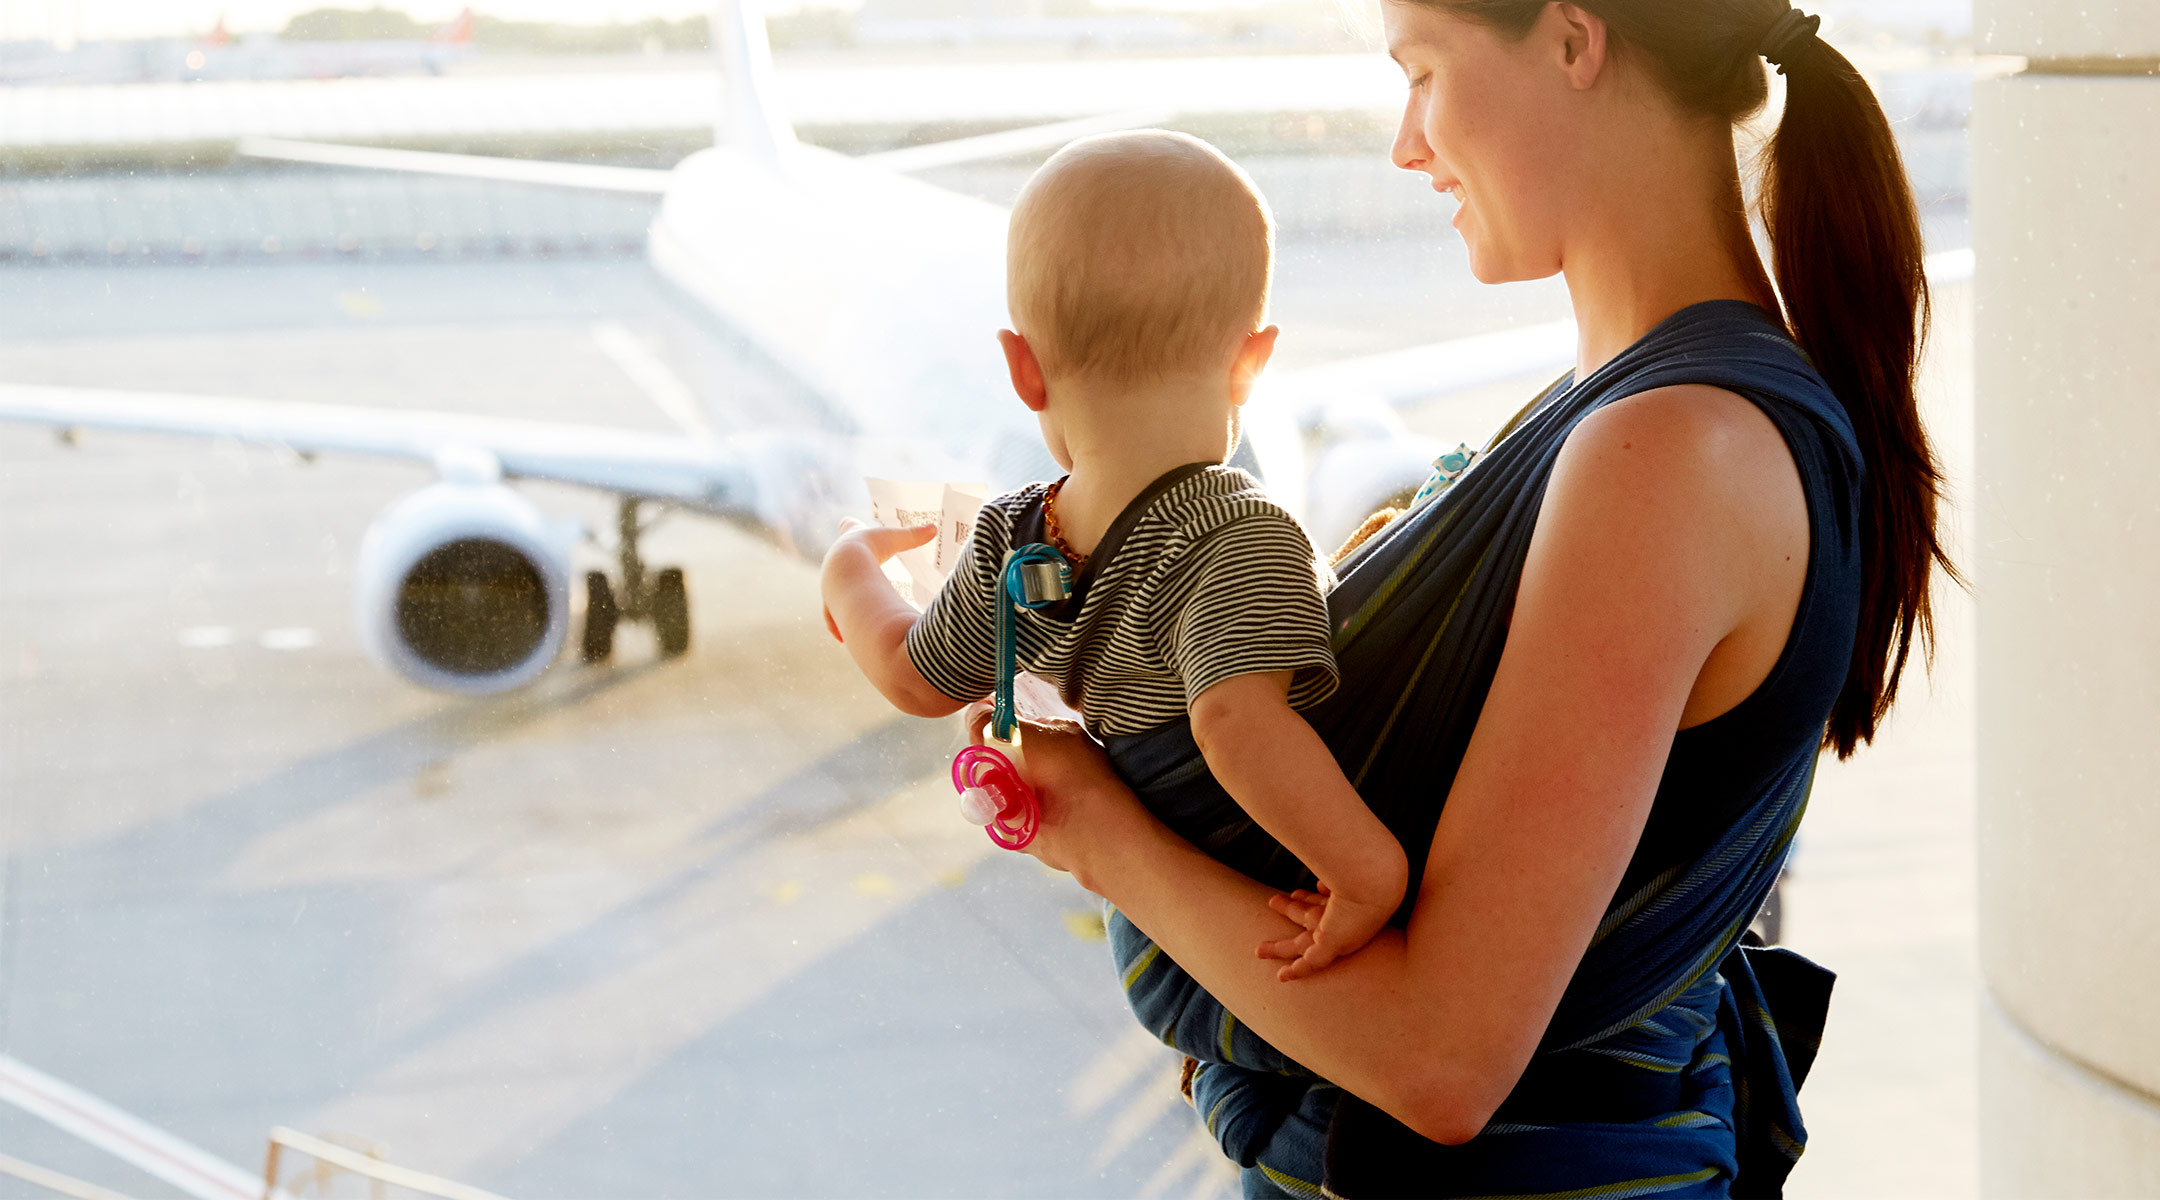 airports now require breastfeeding room